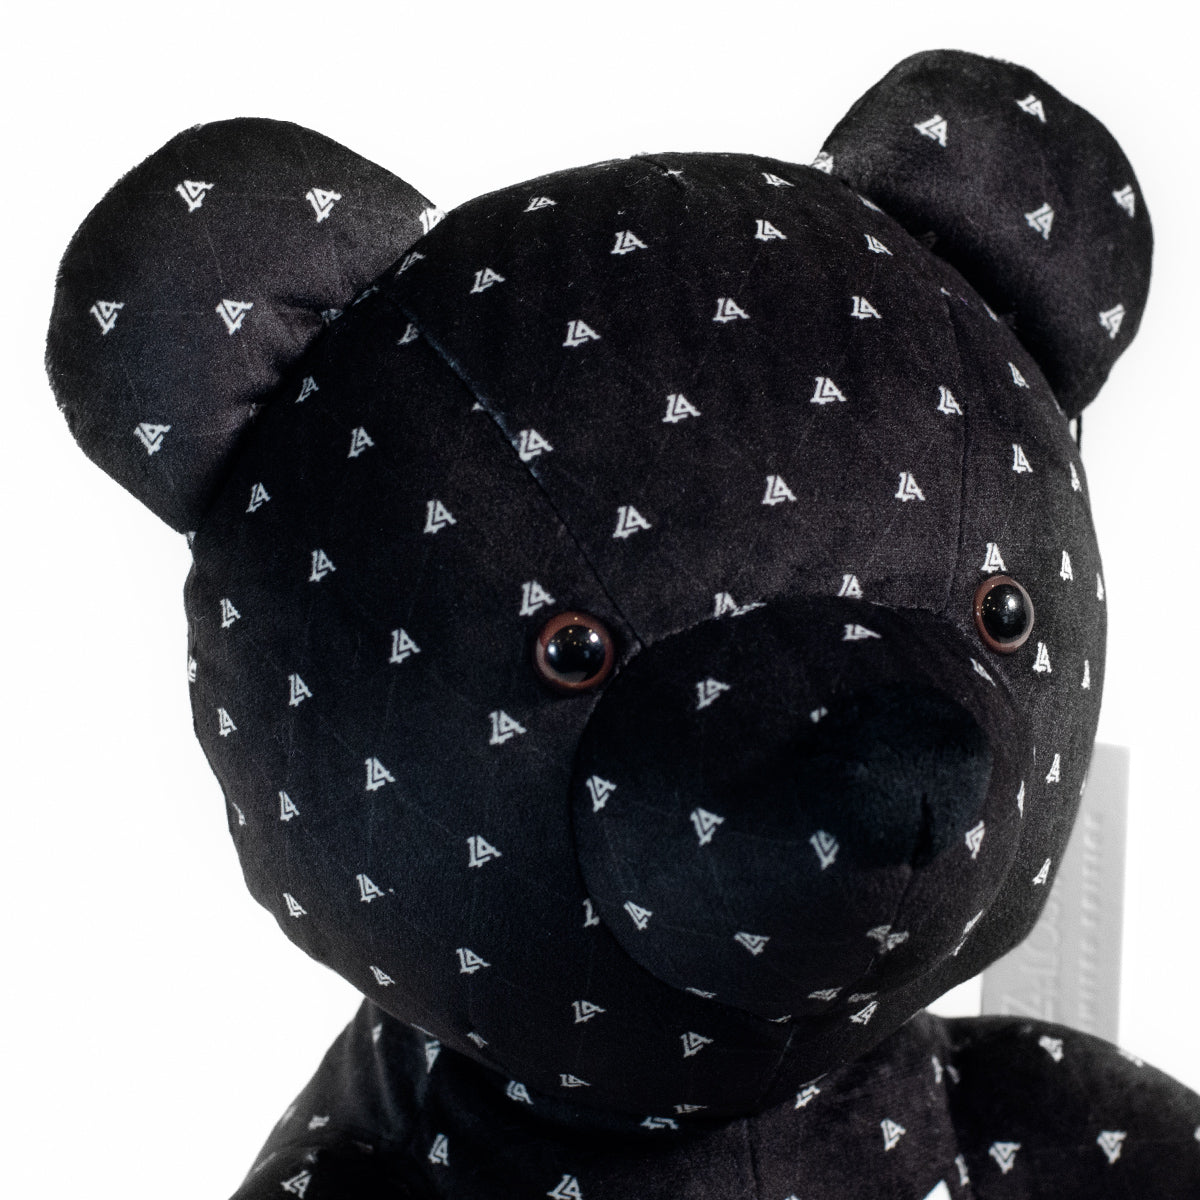 Lost Art Canada - black white patterned teddy bear close up view